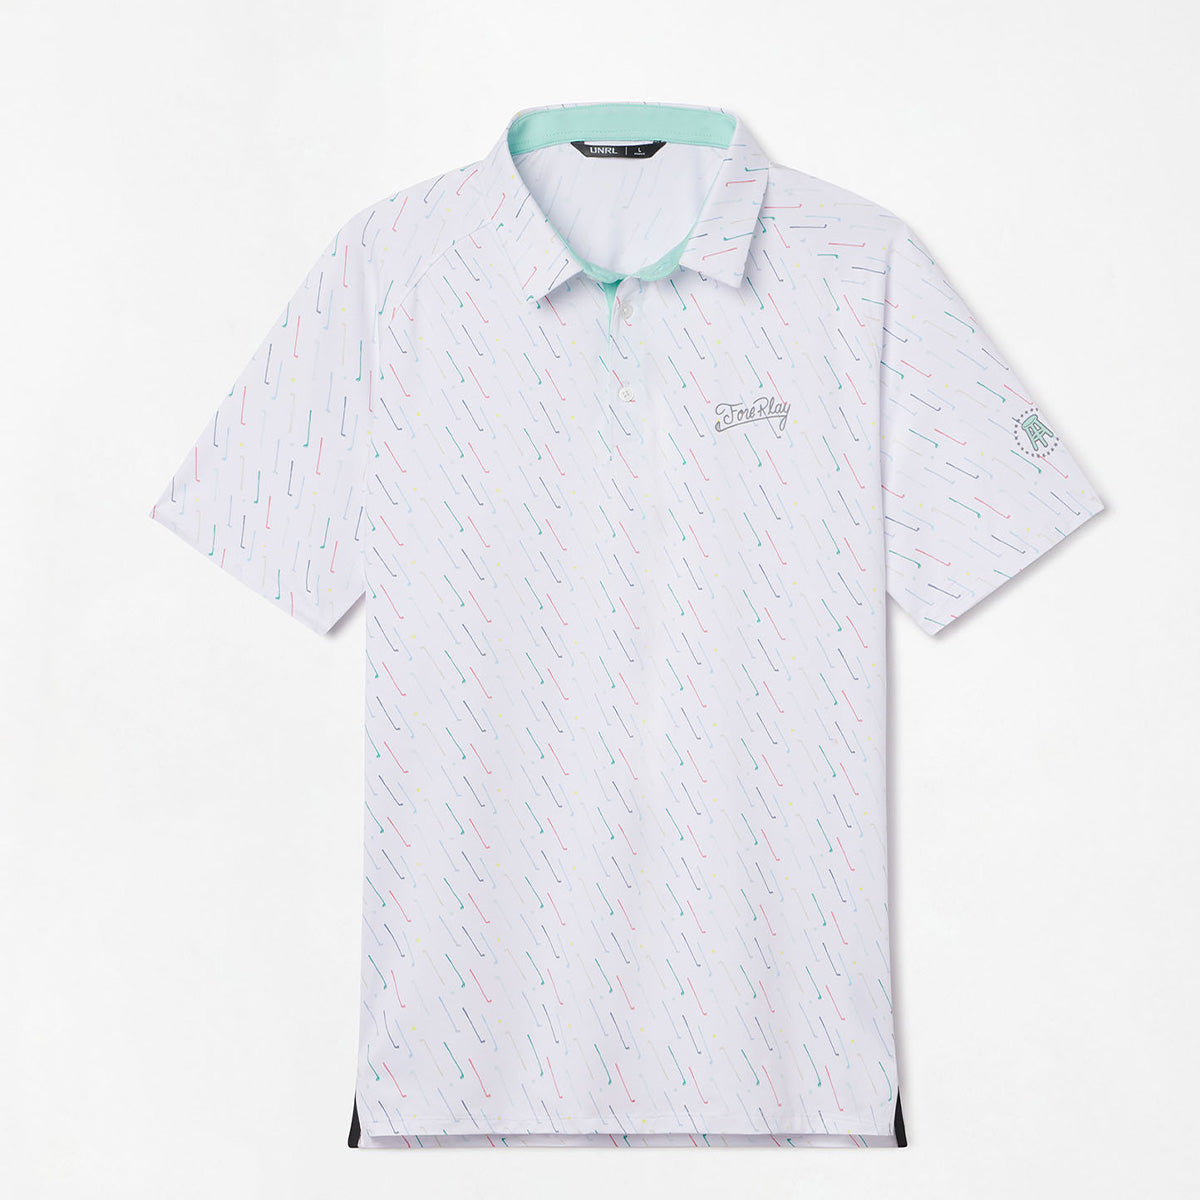 UNRL x Foreplay Back 2 Basics Polo-Polos-Fore Play-White-S-Barstool Sports